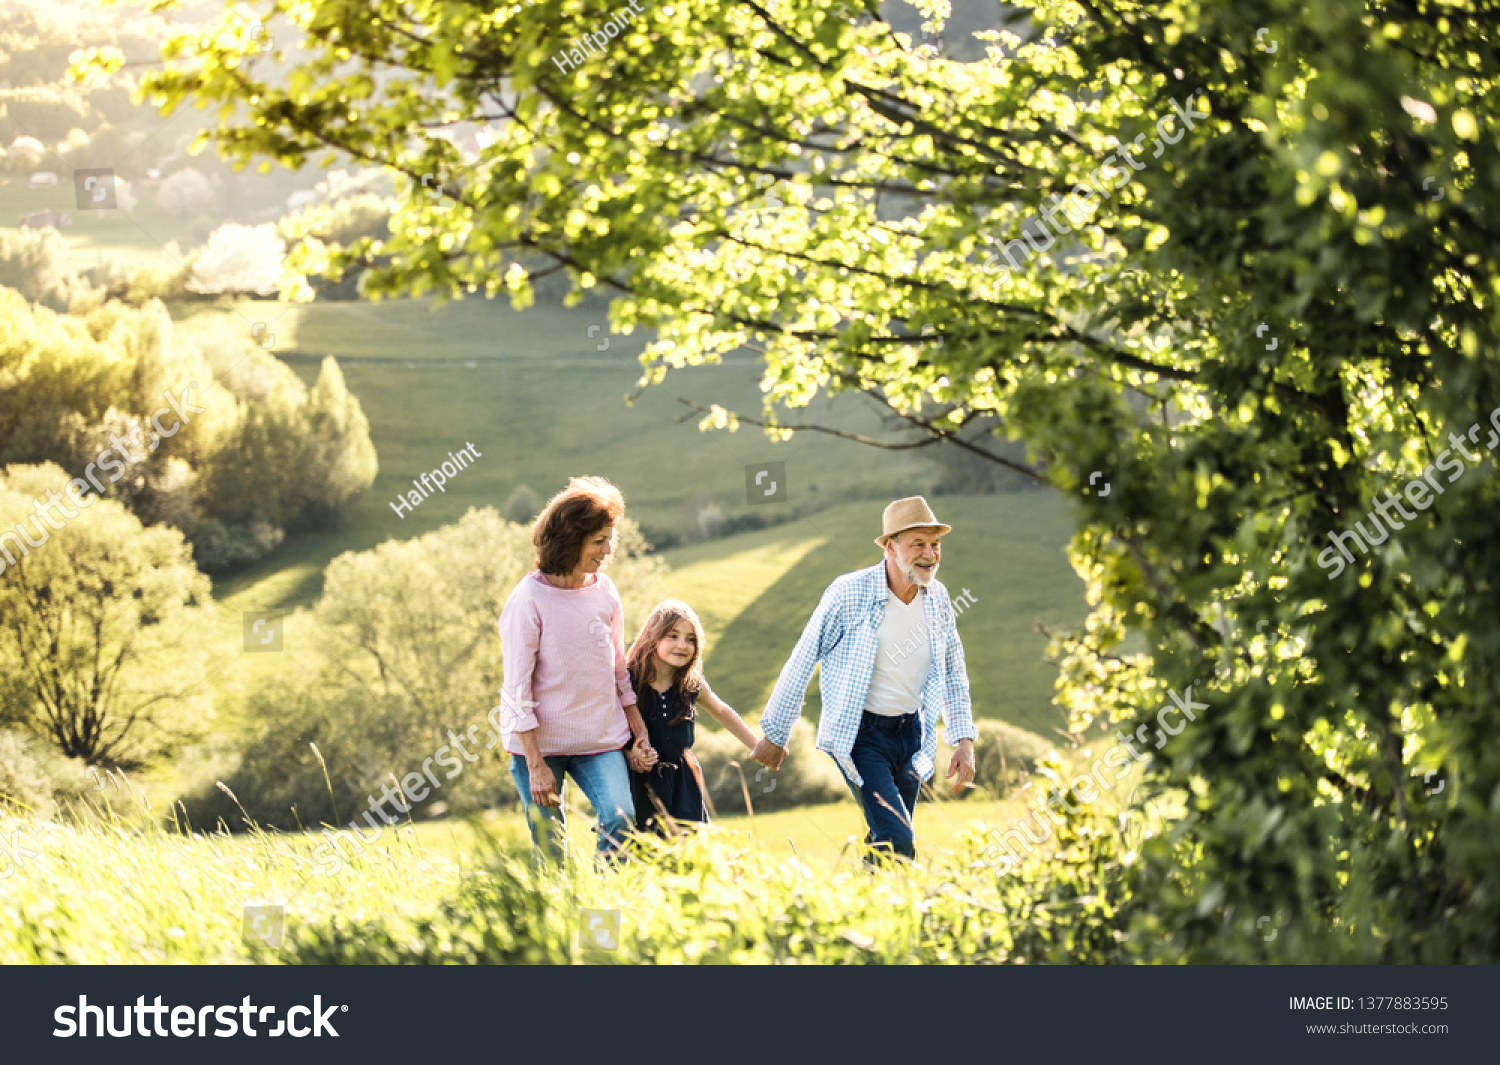 Senior couple with granddaughter on a walk outside in spring nature. #1377883595